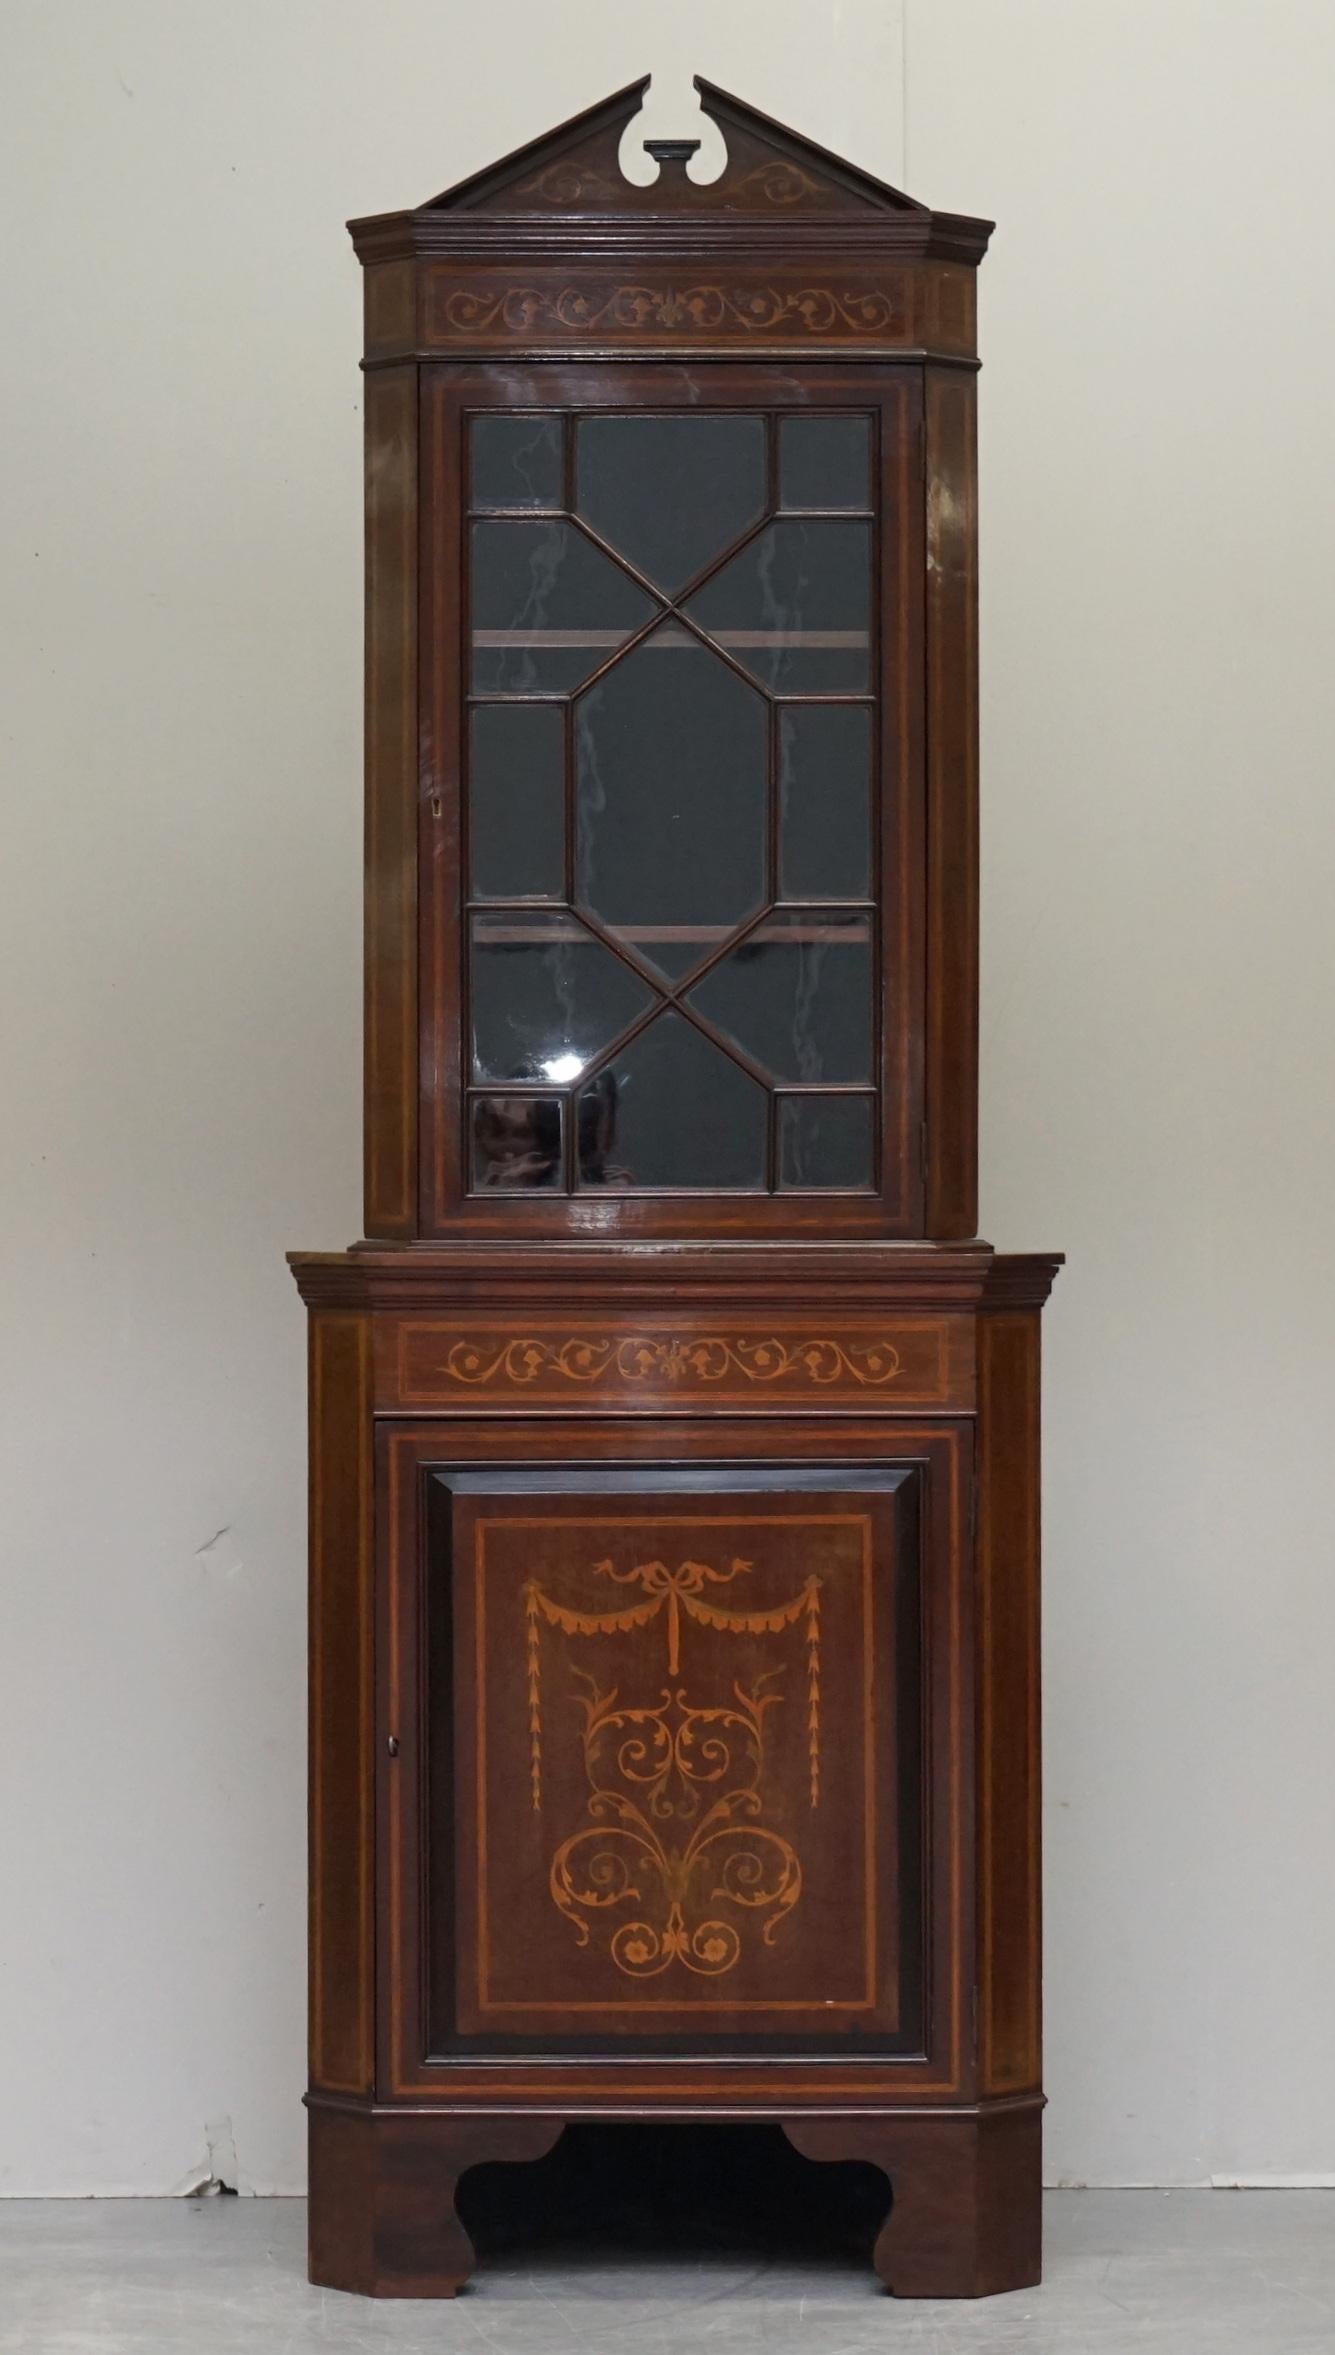 
Wimbledon-Furniture is delighted to offer for sale this lovely antique Victorian 19th century Astral glazed Dutch inlaid bookcase in walnut

Please note the delivery fee listed is just a guide, it covers within the M25 only for the UK and local